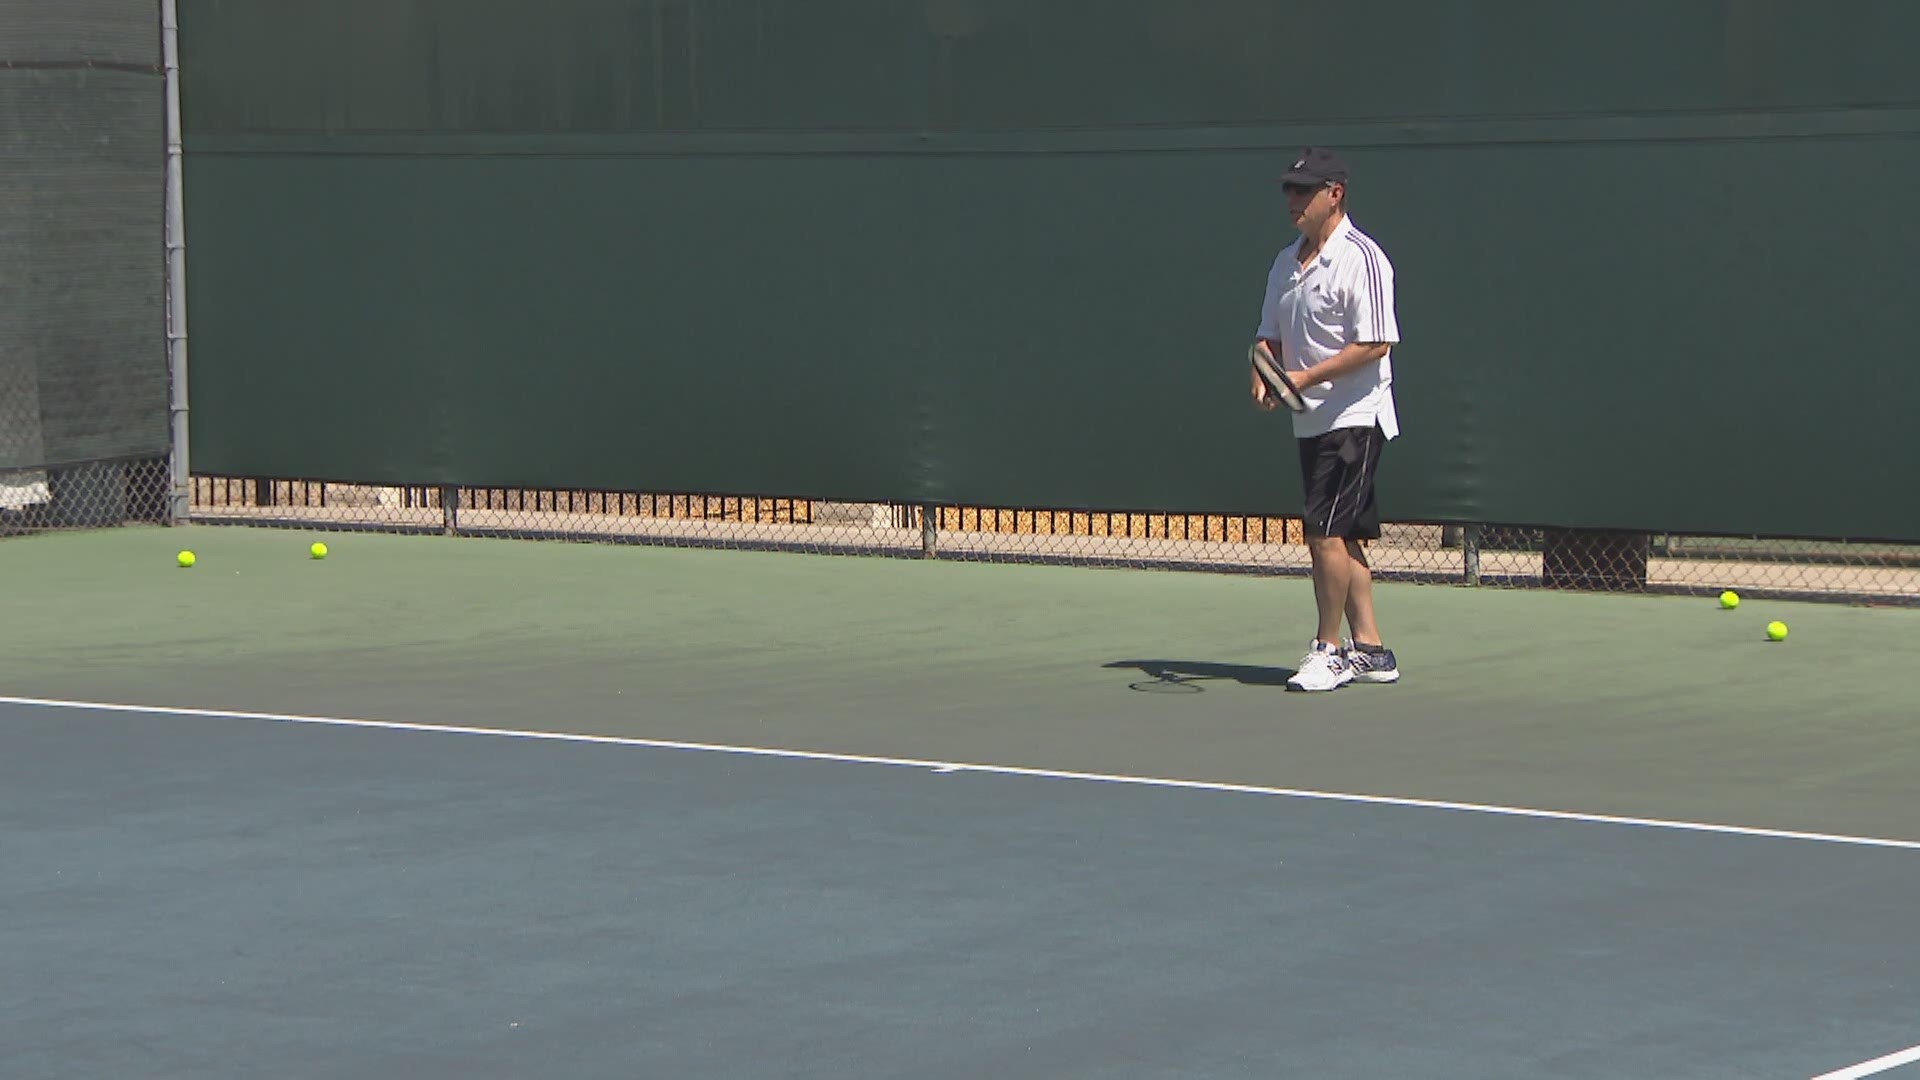 A tennis player in Rancho Bernardo was not quite ready to call it game, set and match.